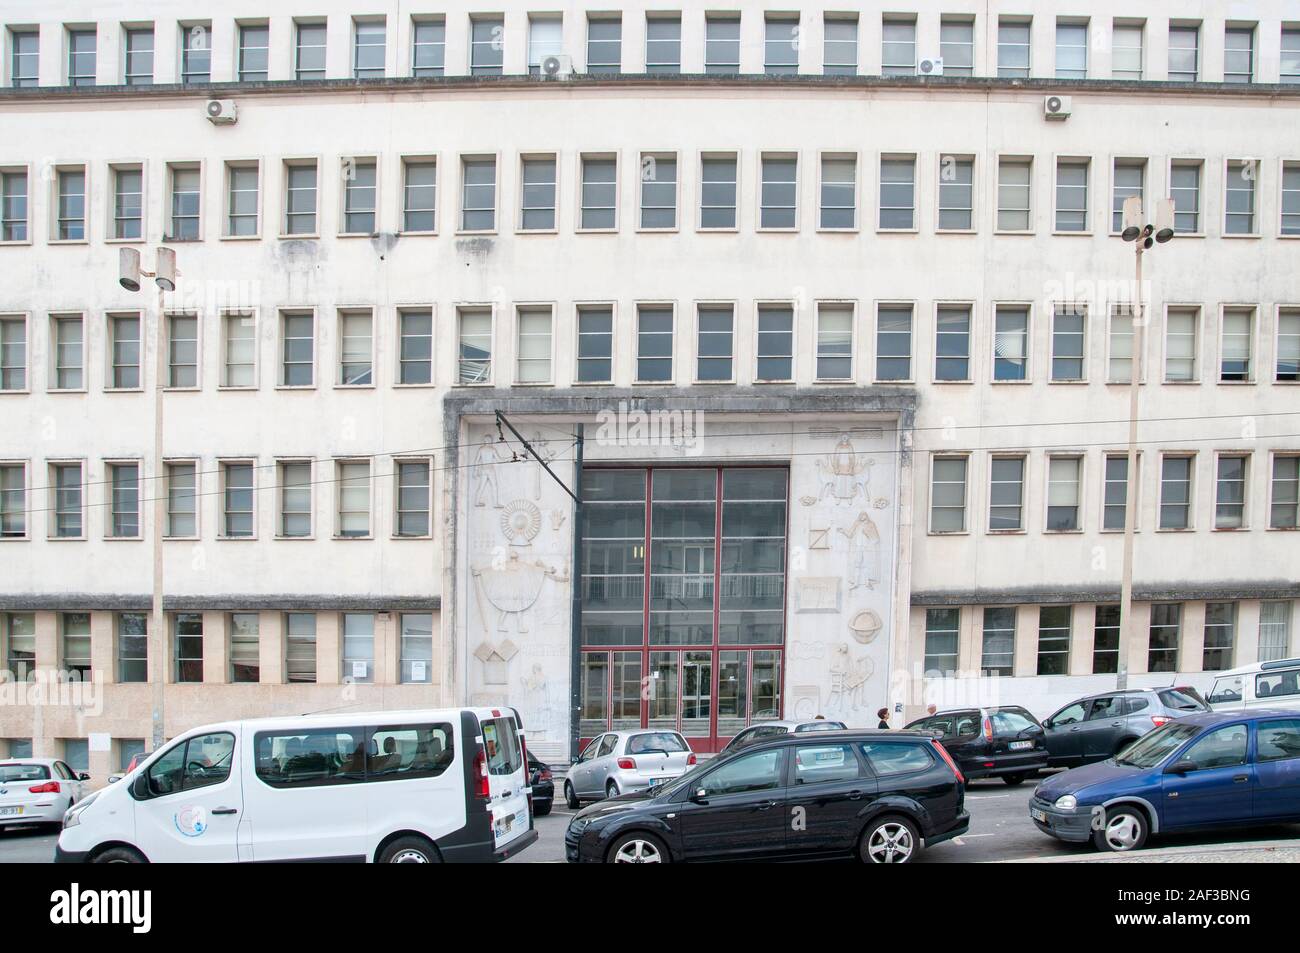 Faculty of Mathematics at the university of Coimbra, Coimbra, Portugal Stock Photo